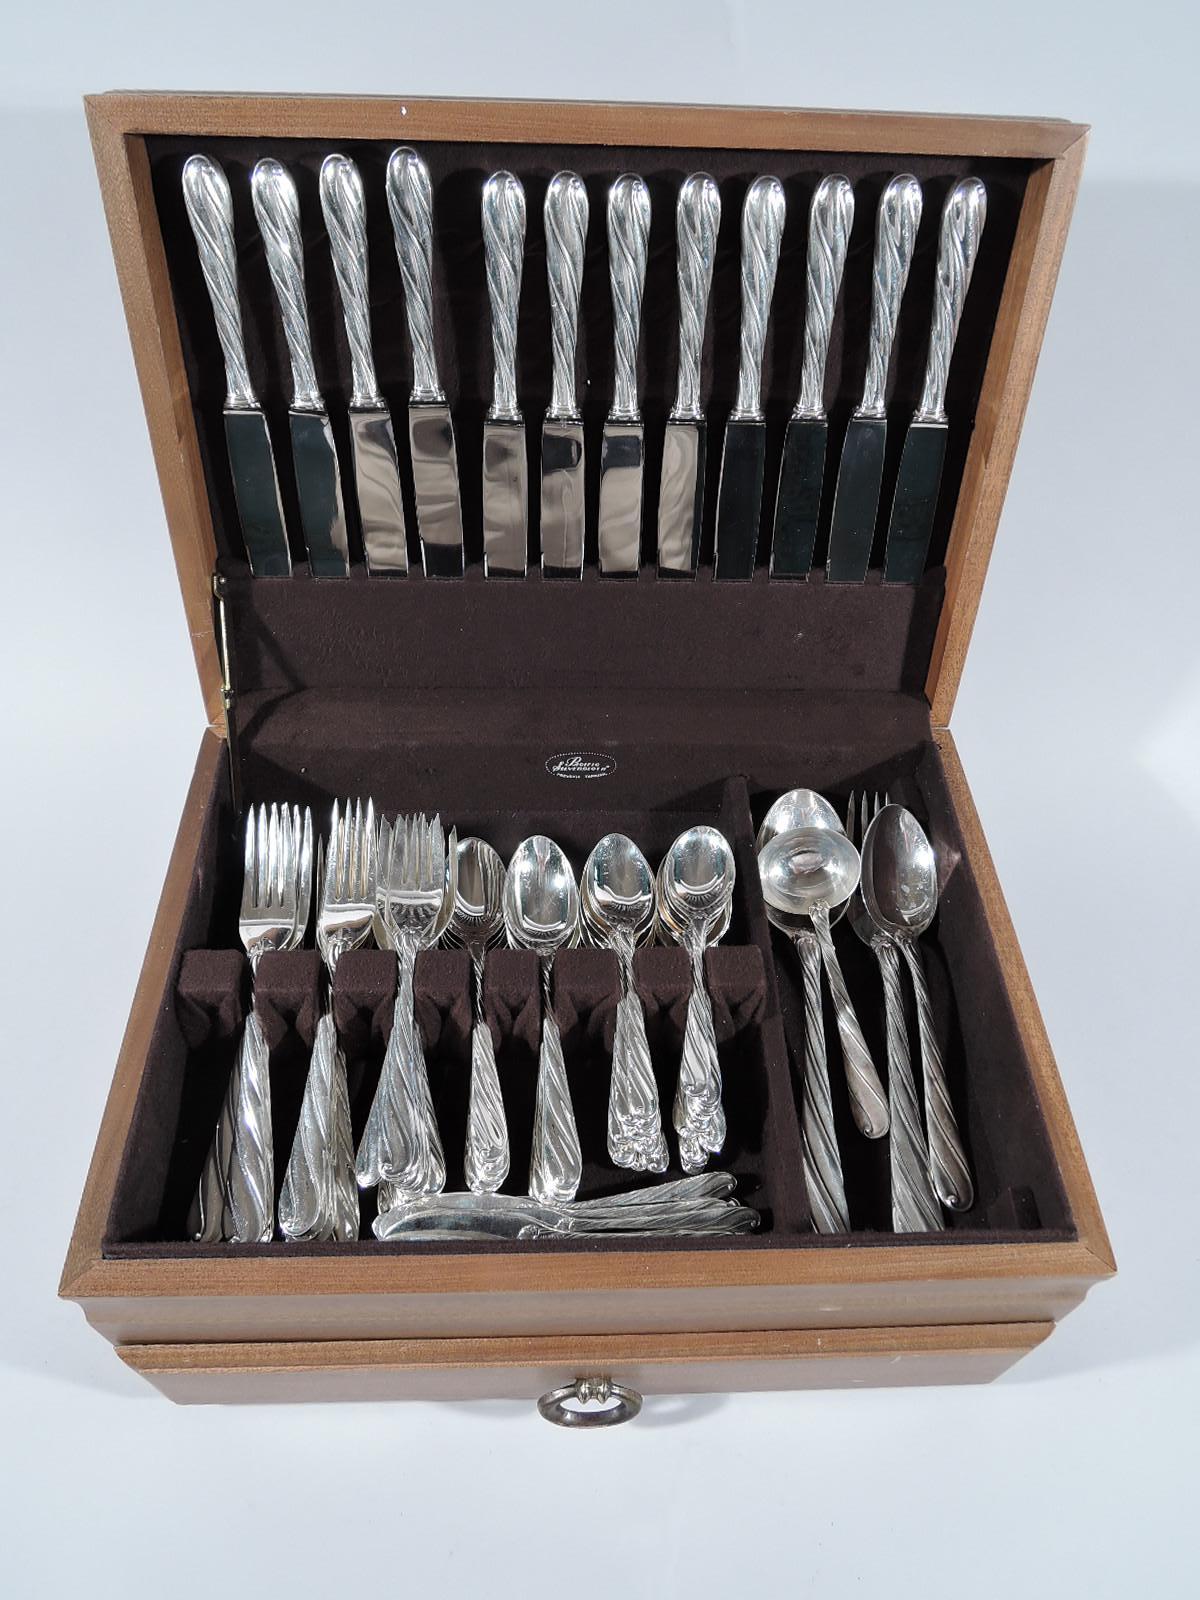 Italian Buccellati Torchon Sterling Silver Dinner Set for 12 with 88 Pieces